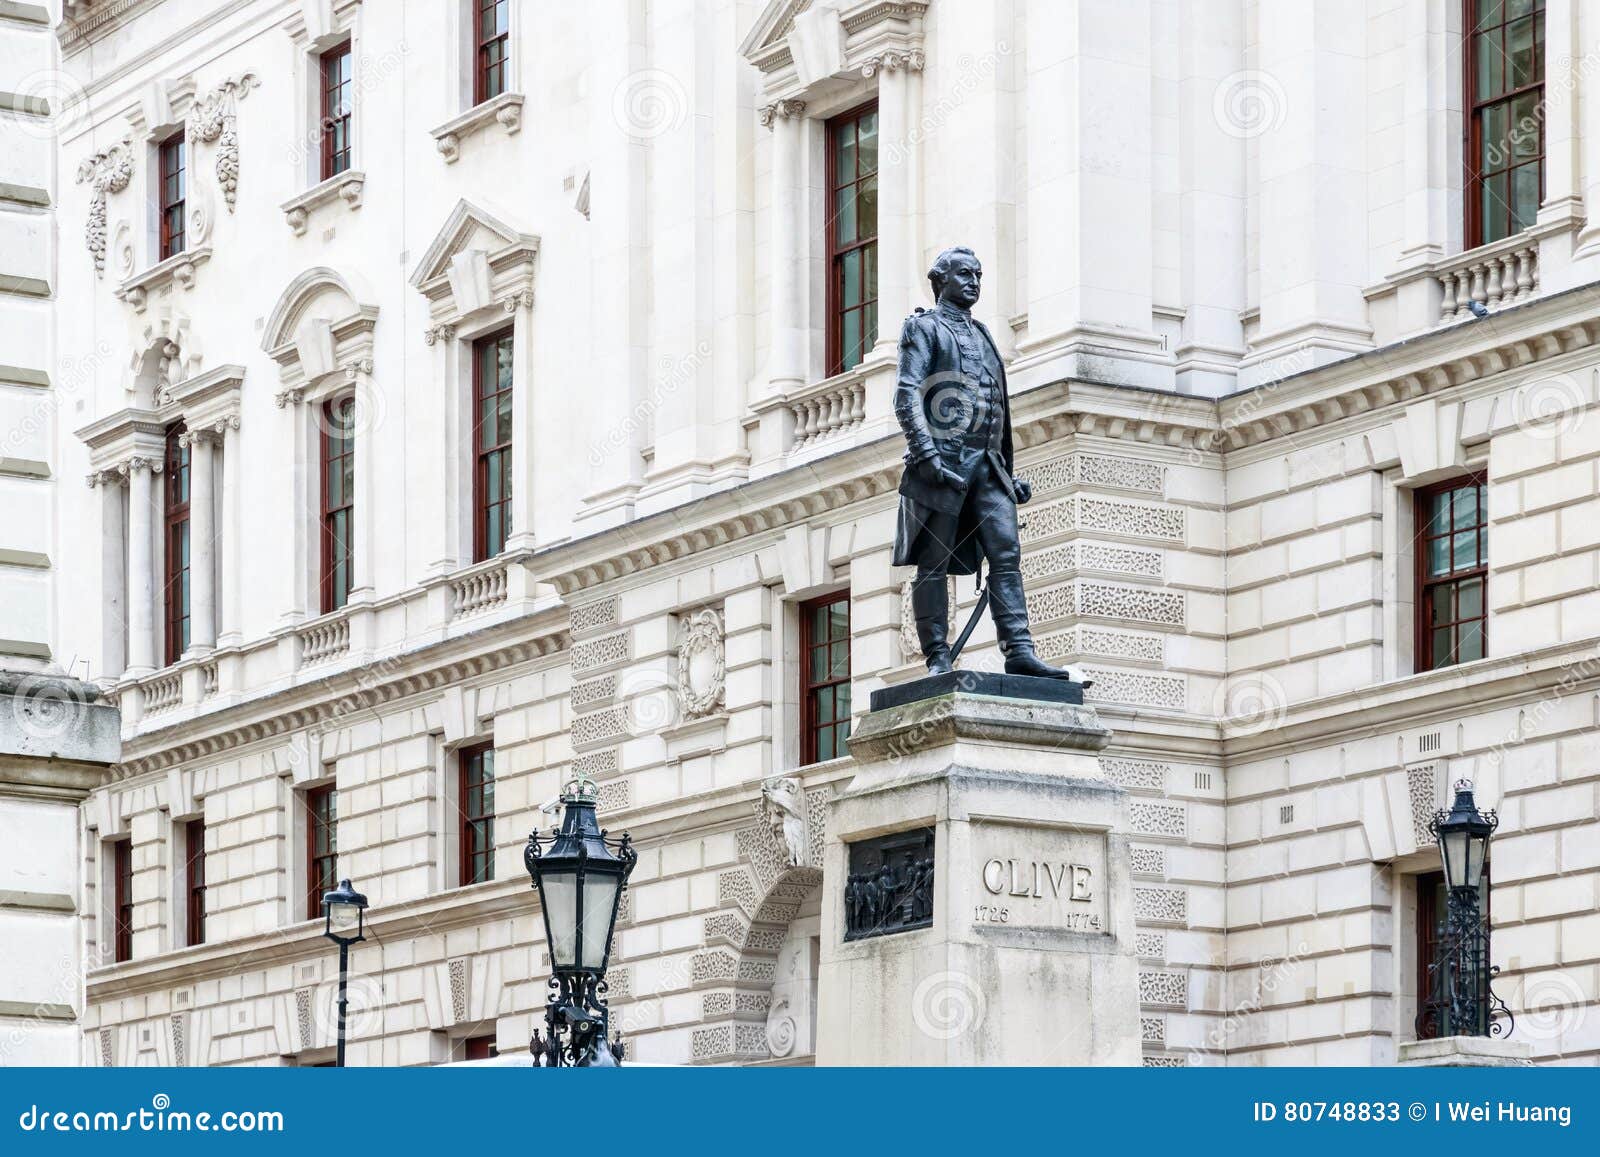 churchill war rooms and robert clive memorial in london